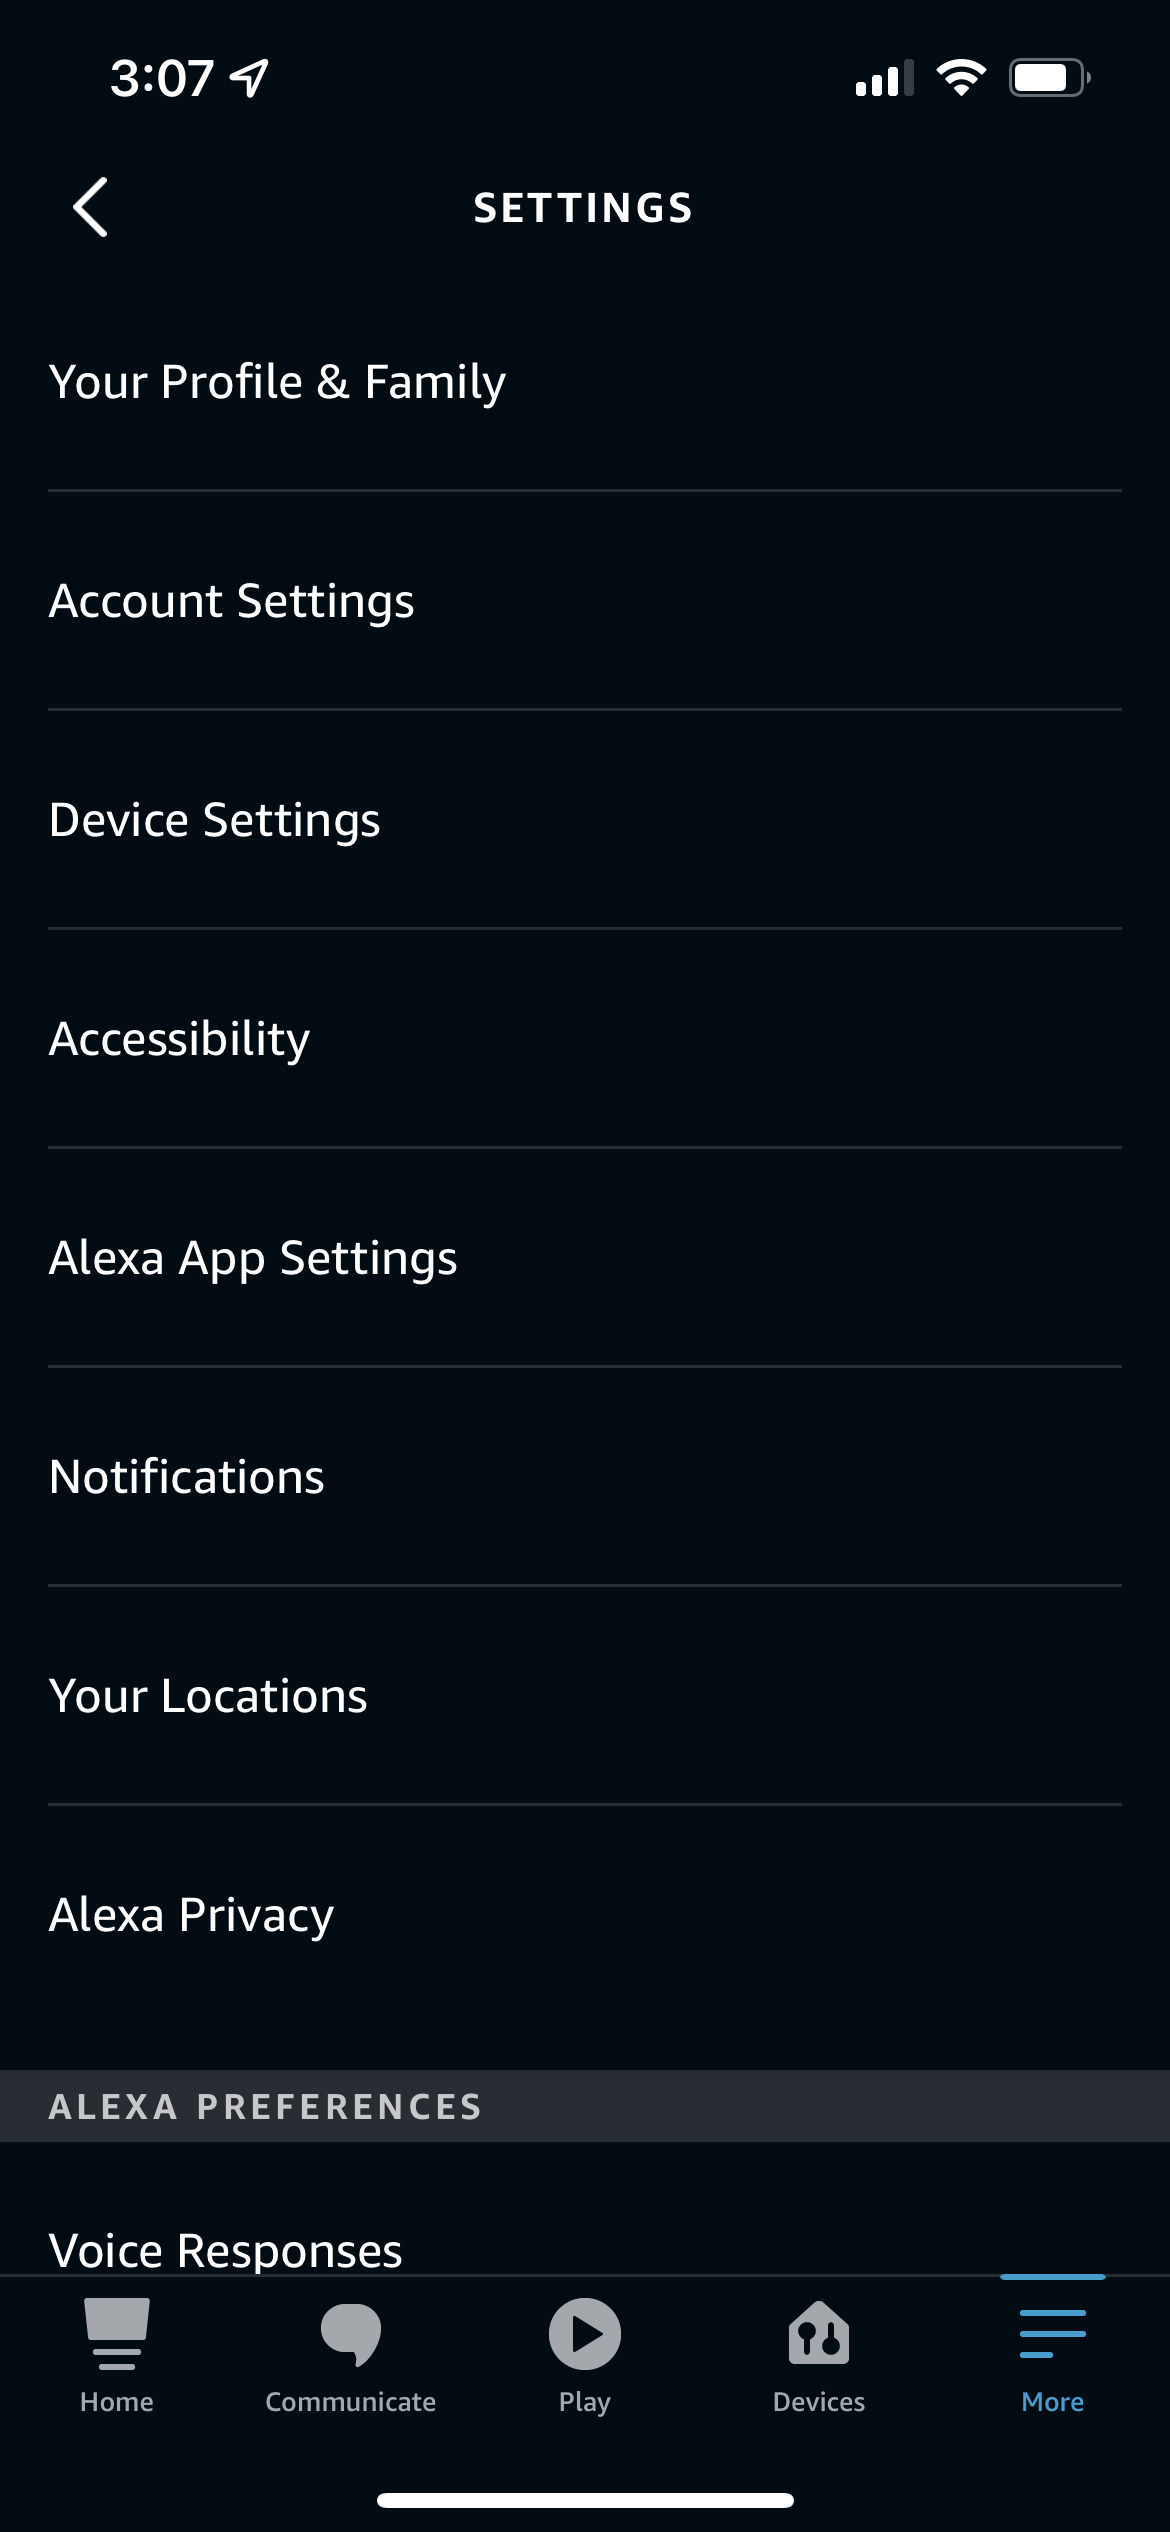 Some of the categories in the Amazon Alexa app's Settings menu